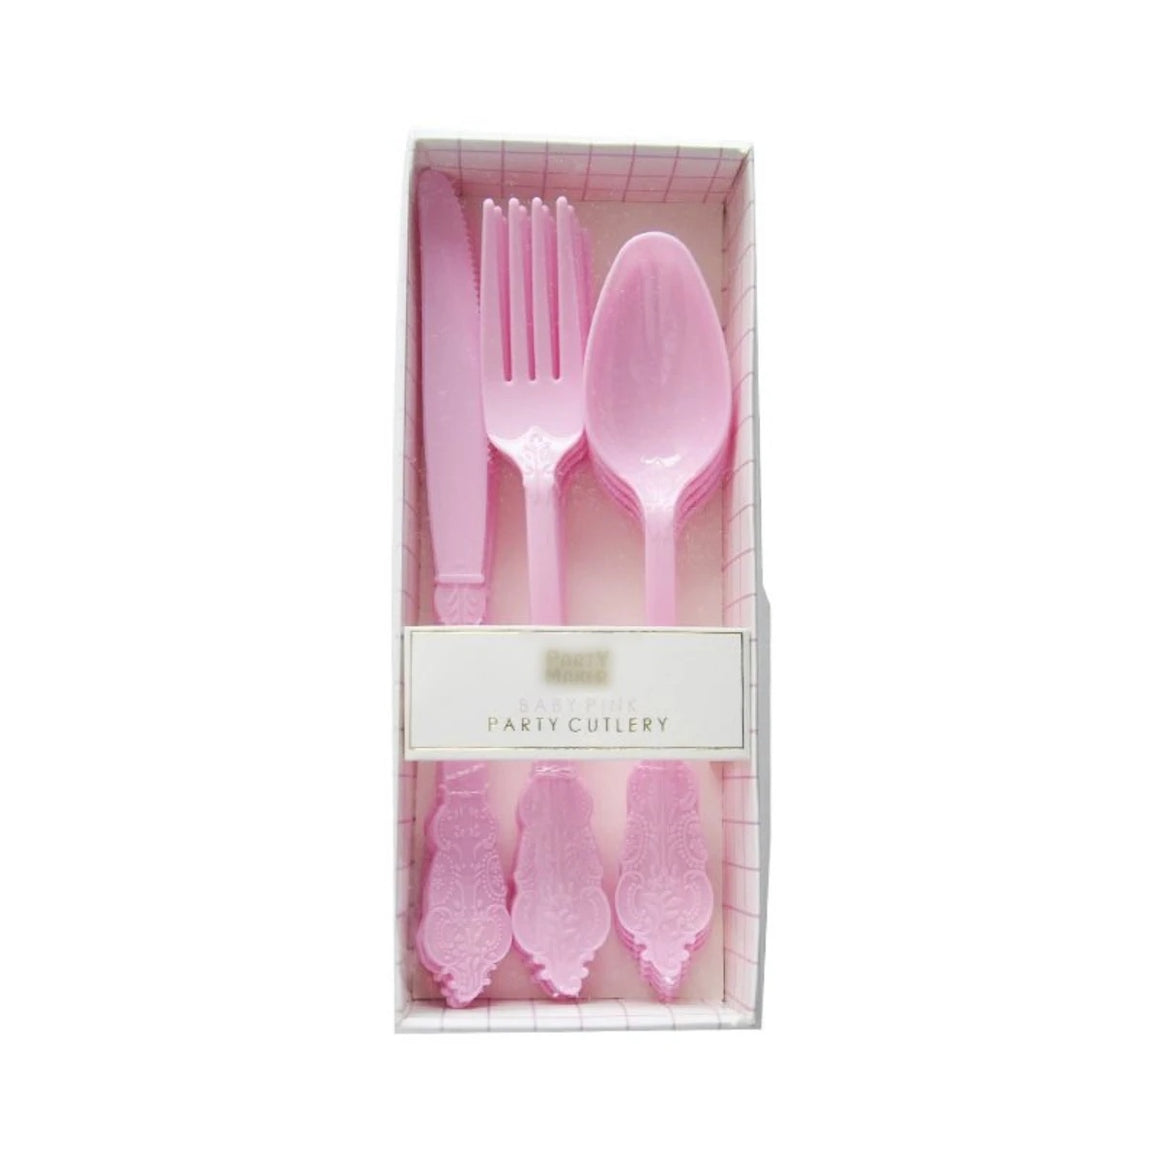 PREMIUM CUTLERY SET - ORNATE PINK (For 4)